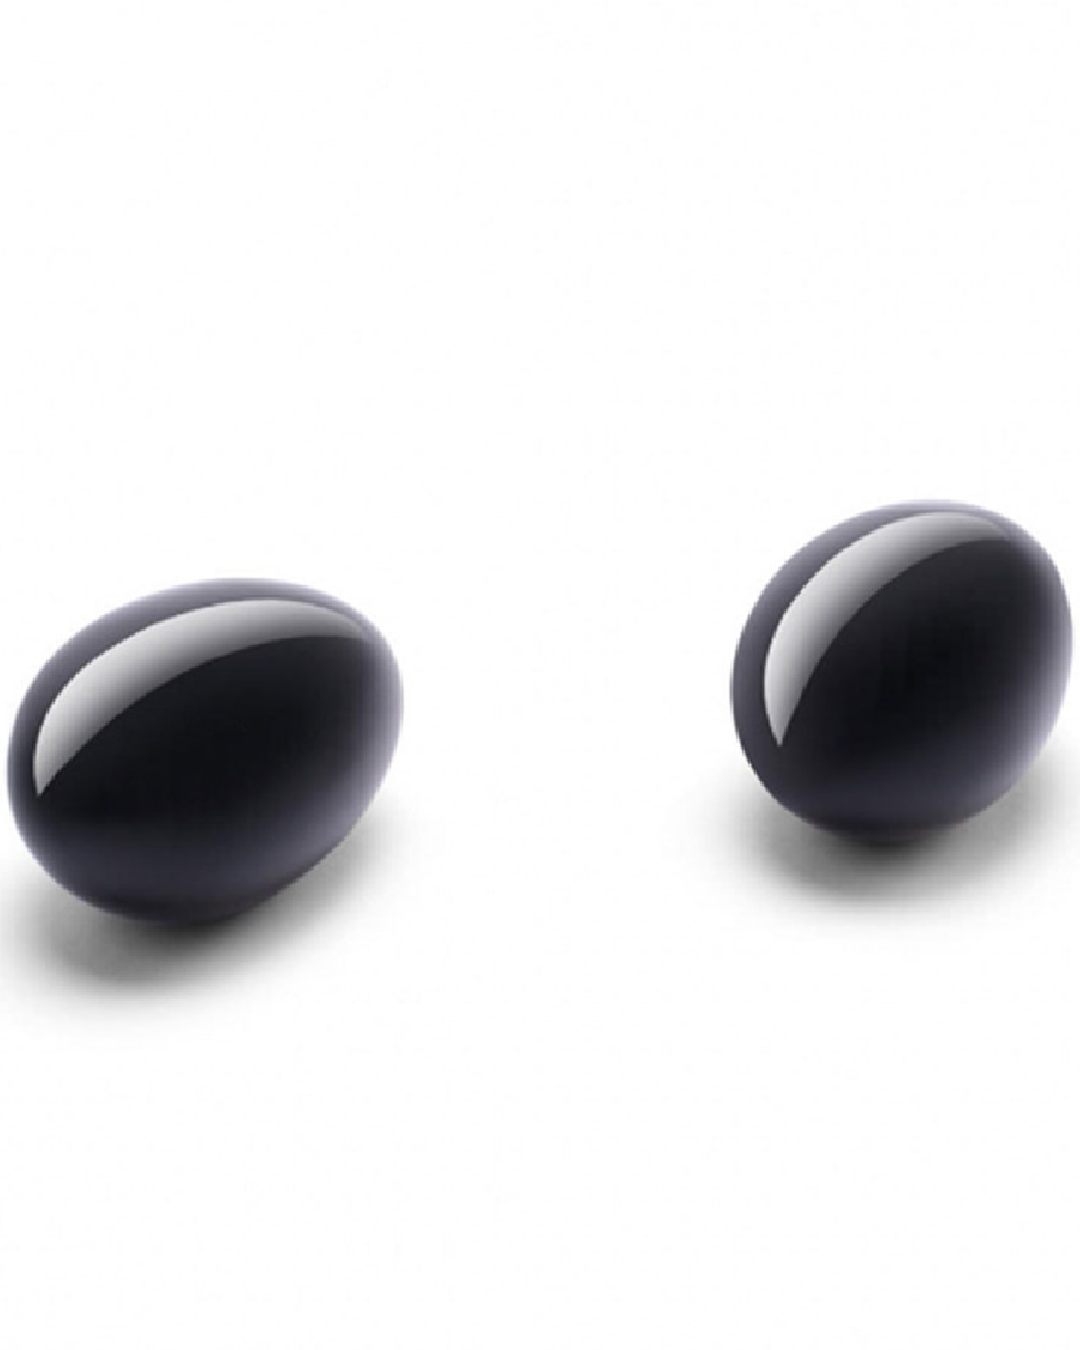 Le Wand Crystal Yoni Eggs - Black Obsidian pictured on white background 